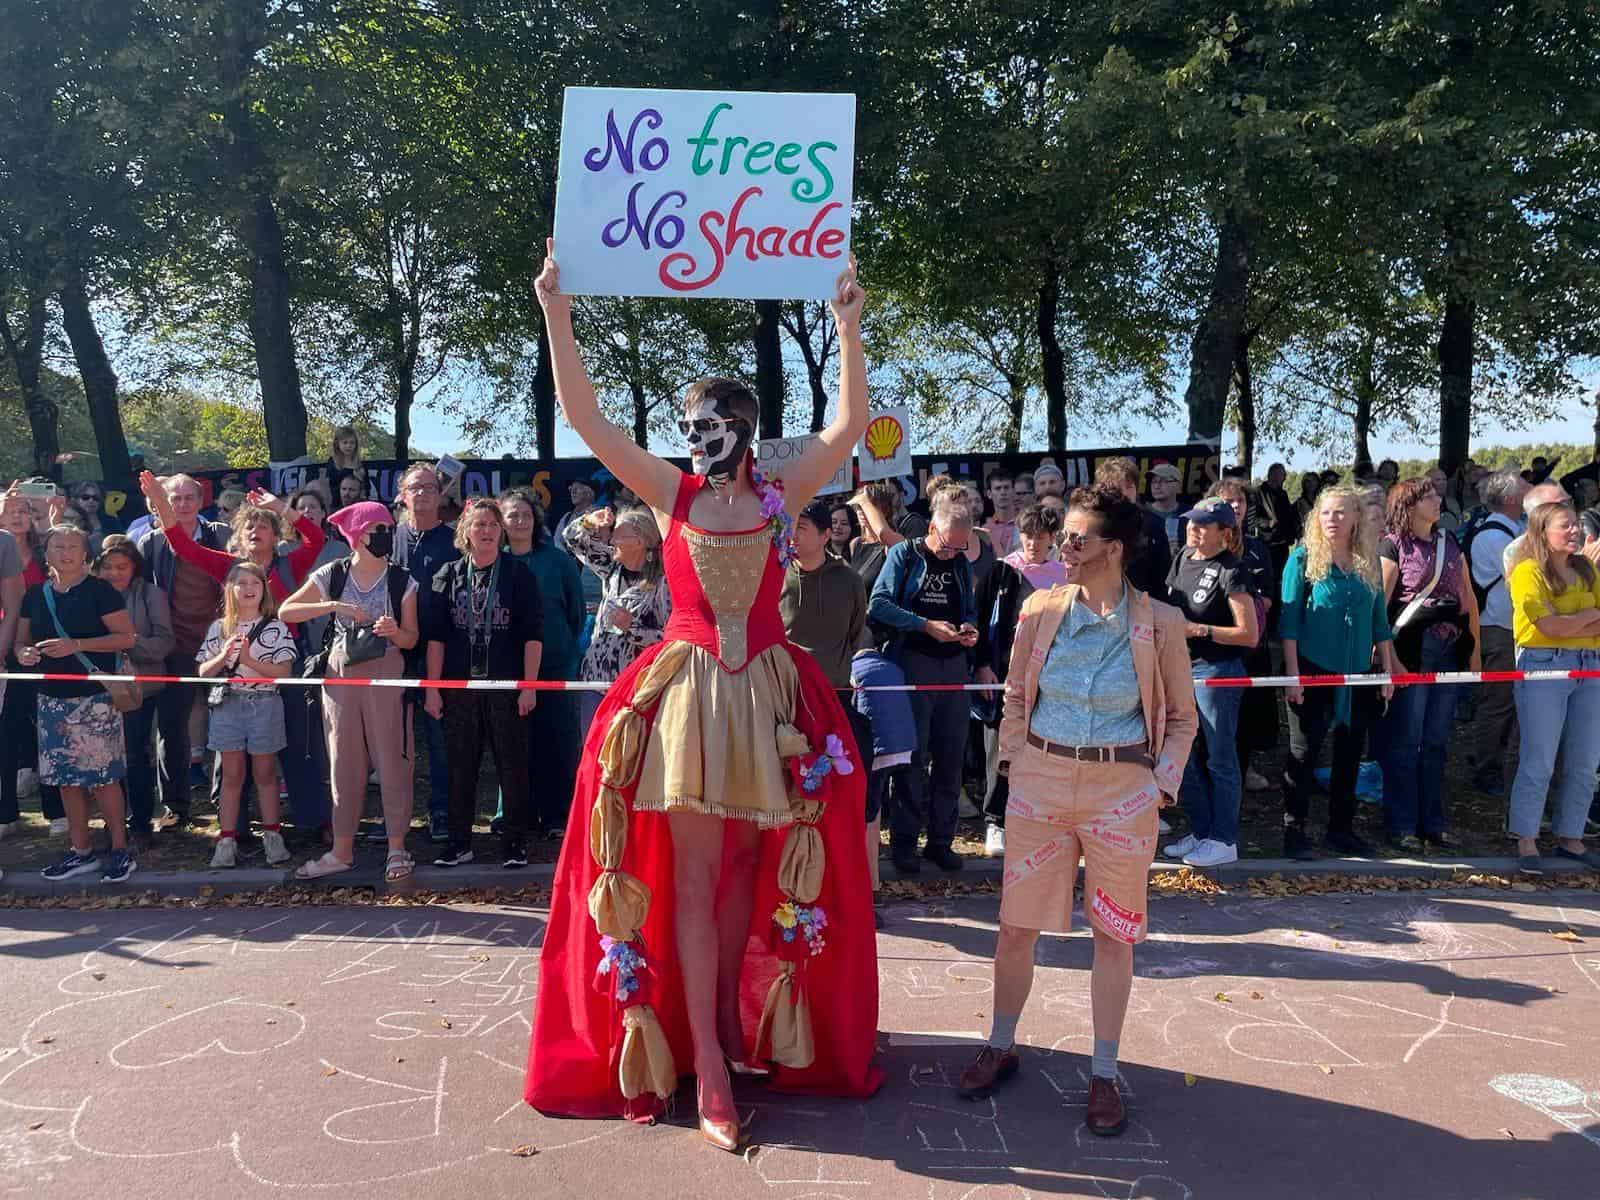 A fabulous drag queen and drag king stand during the A12 Blockade. The drag queen holds up a sign "No trees No shade".